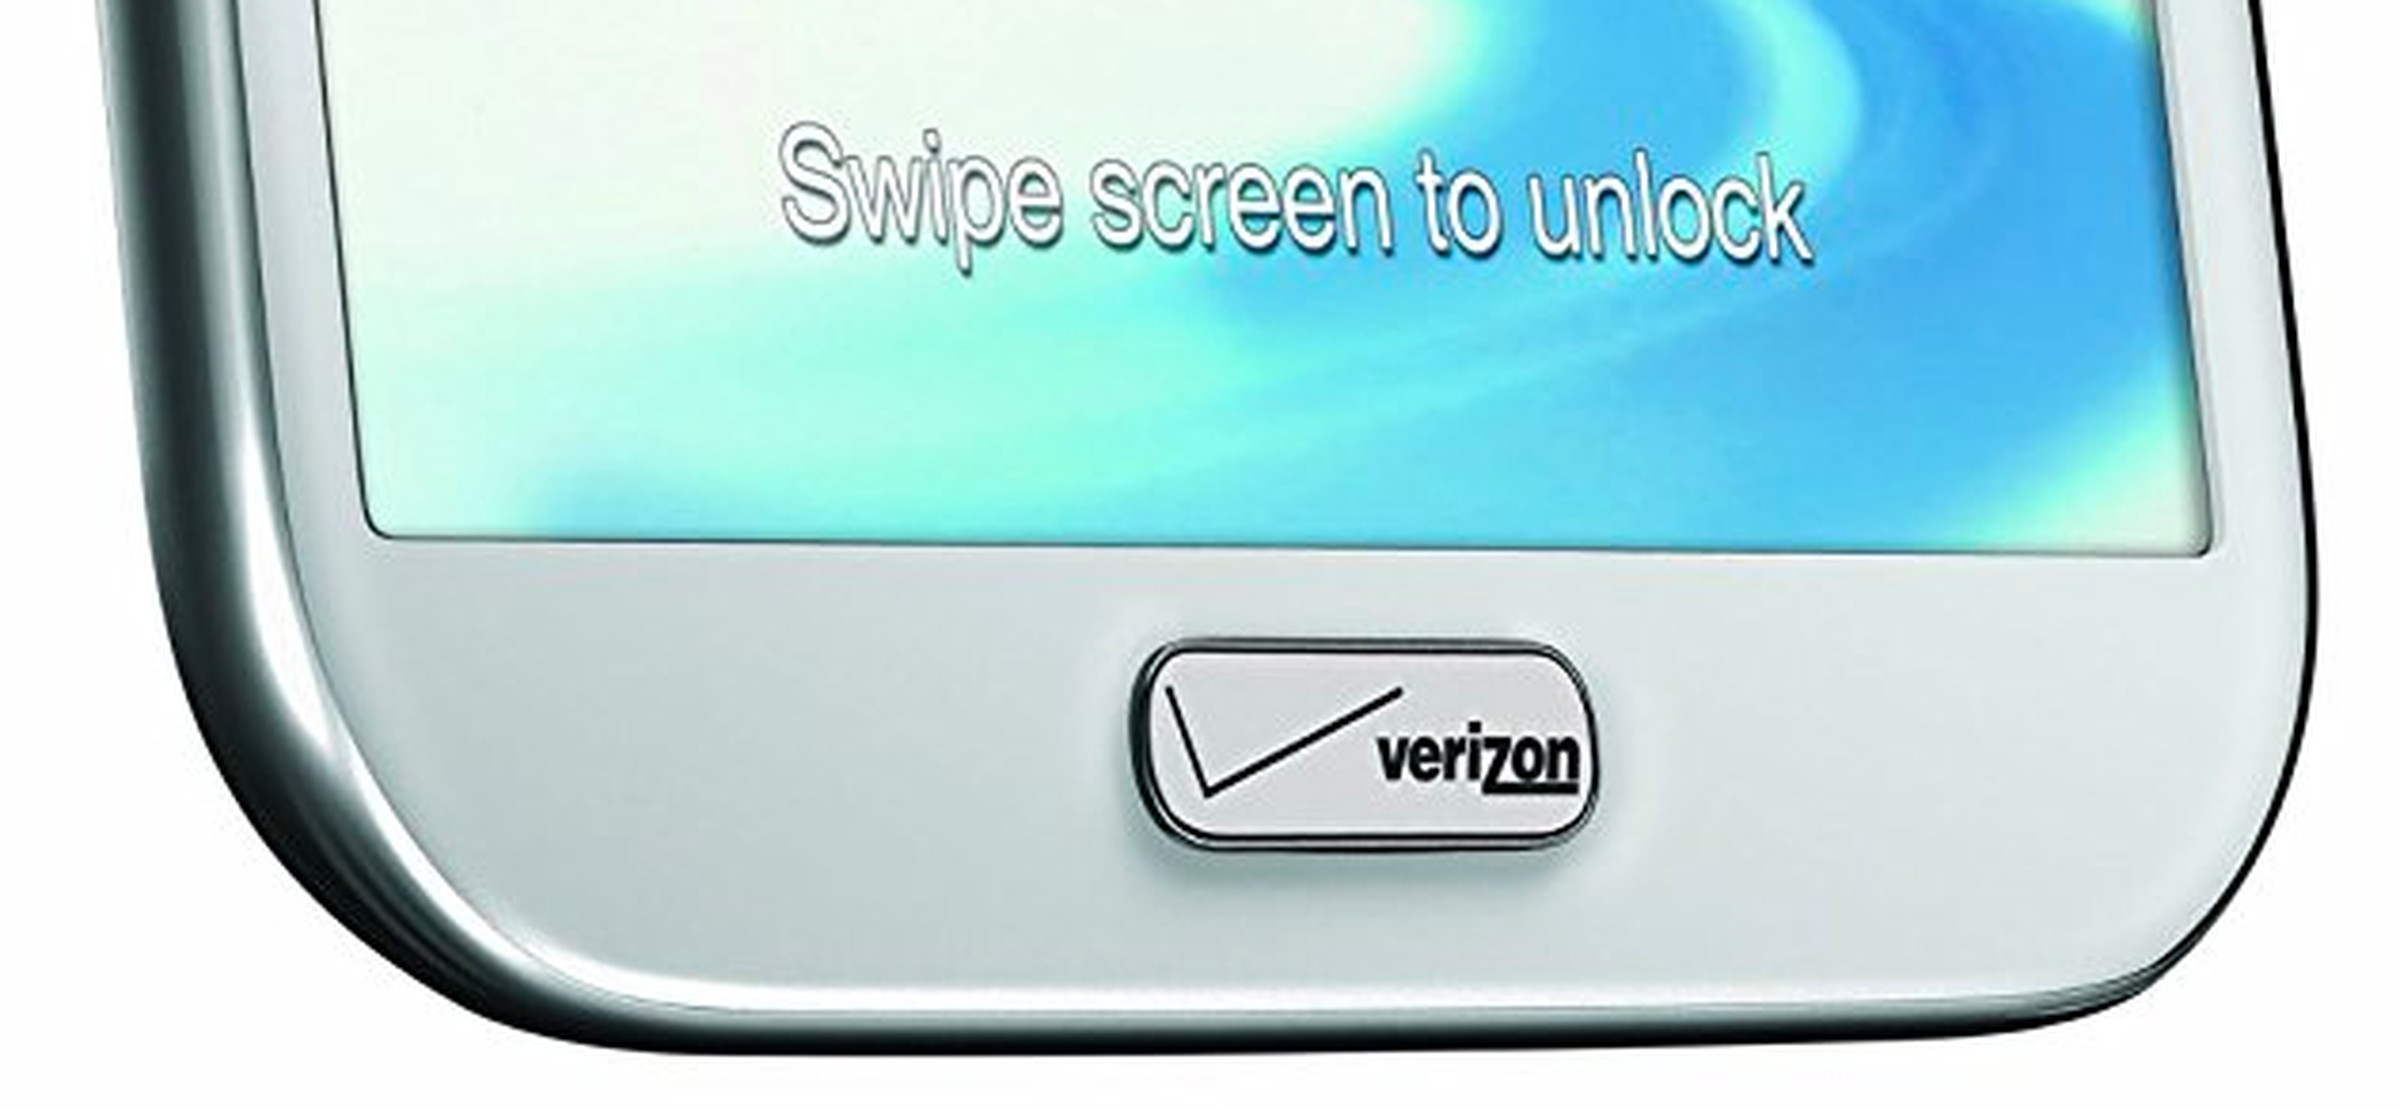 Samsung’s Galaxy Note II had a Verizon logo right on the home button.